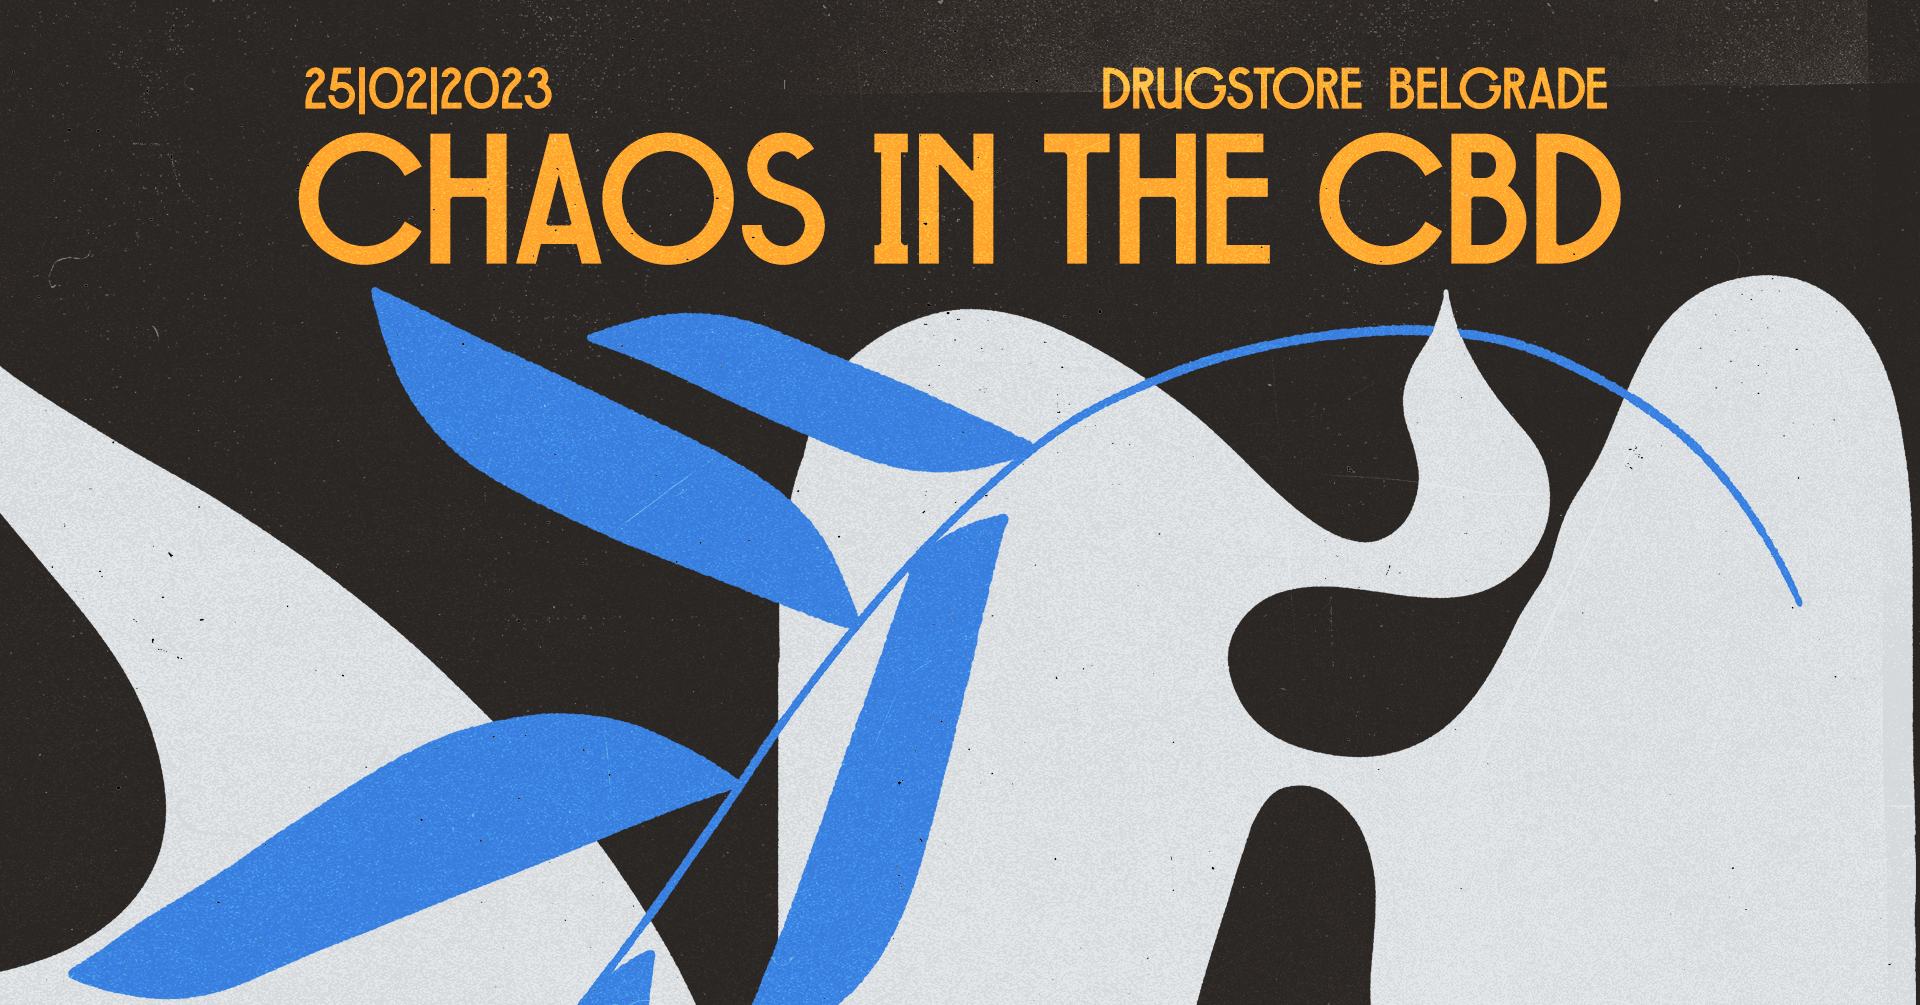 Chaos In The CBD 25.02.2023 Drugstore